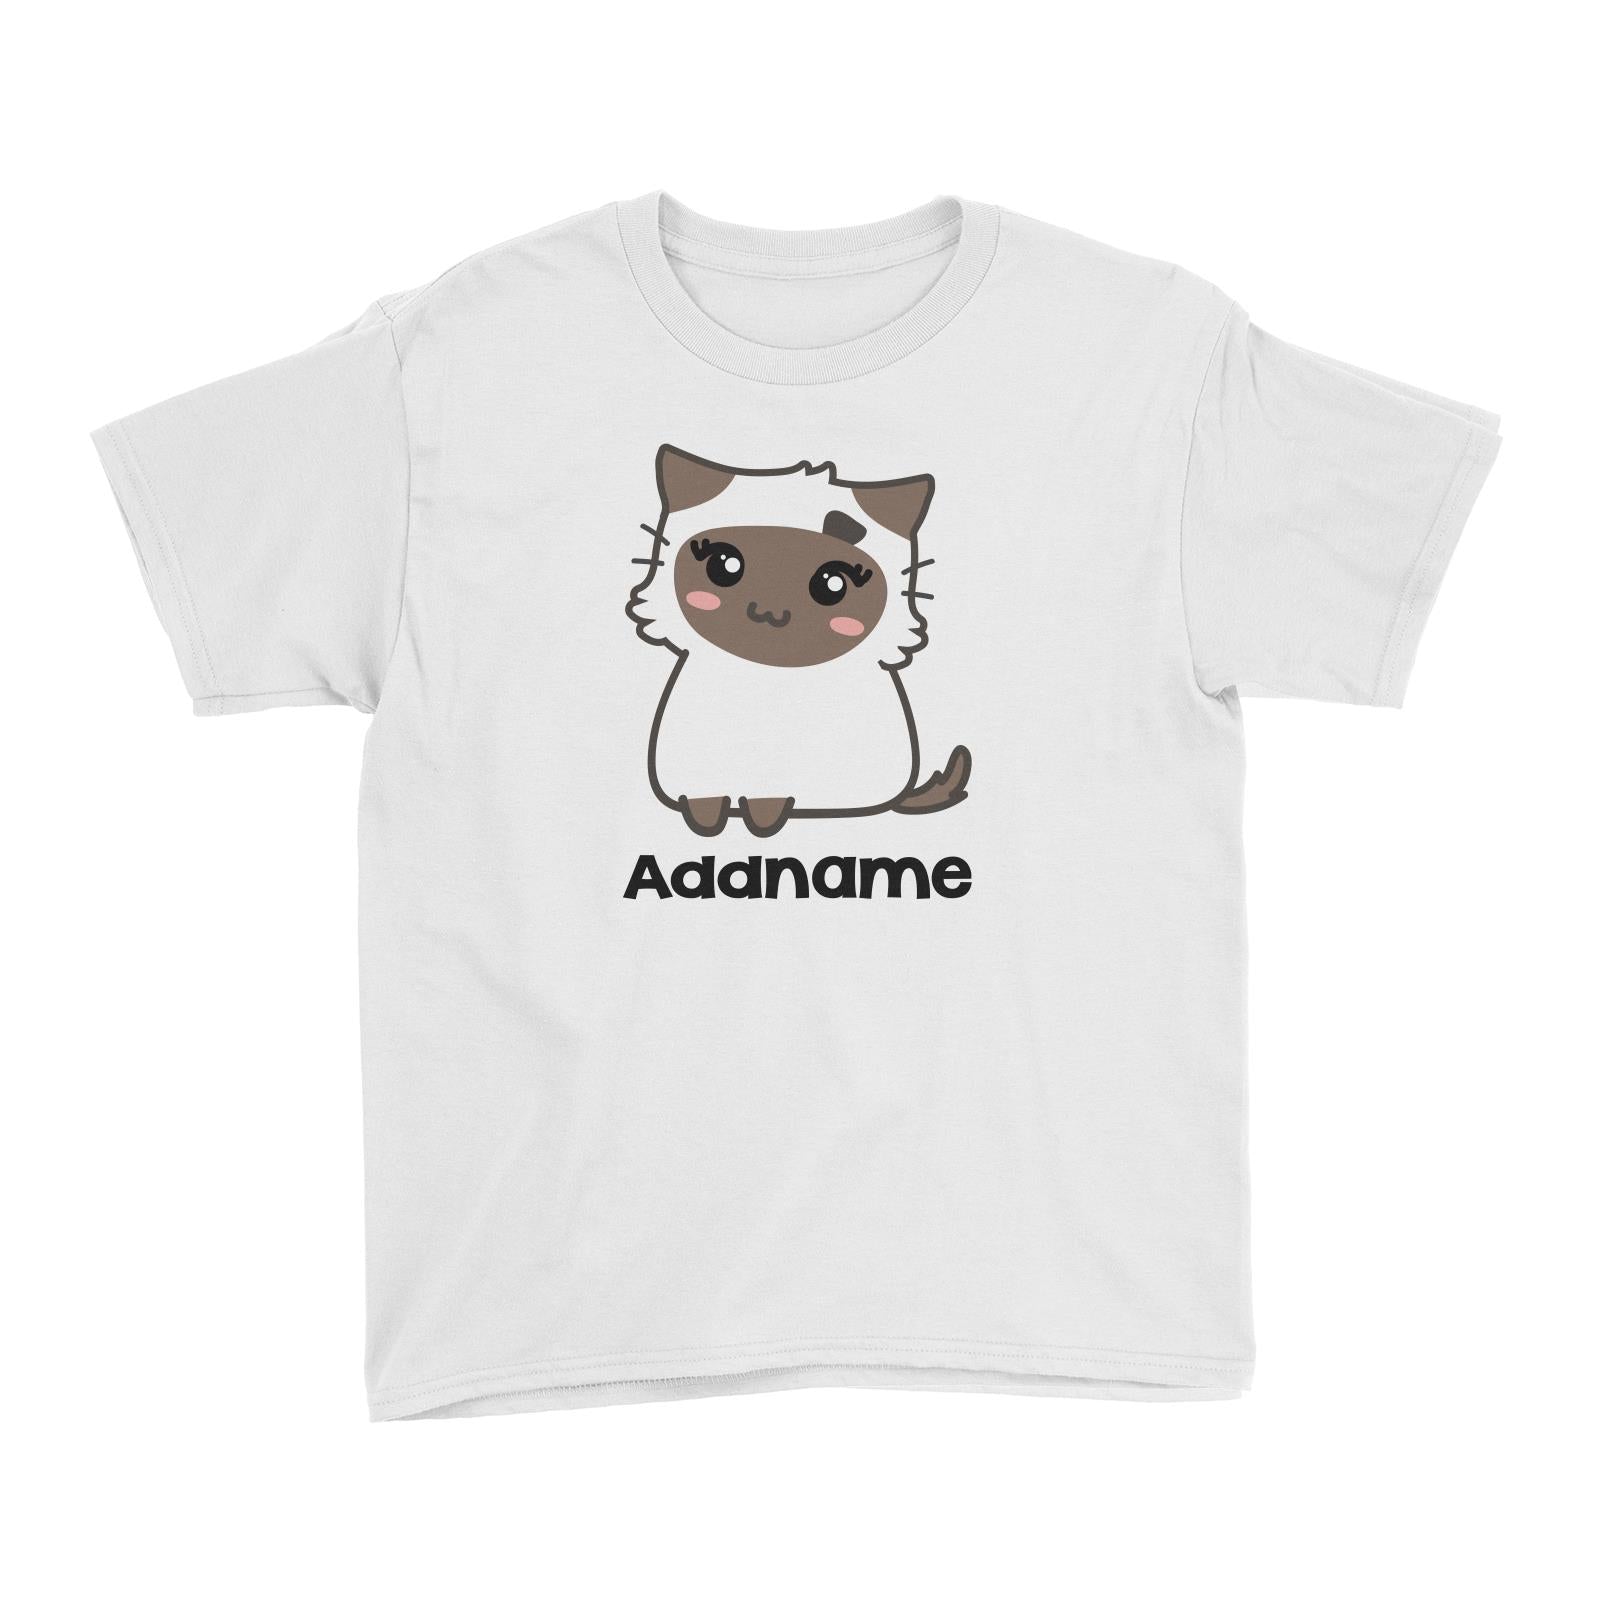 Drawn Adorable Cats White & Chocolate Addname Kid's T-Shirt